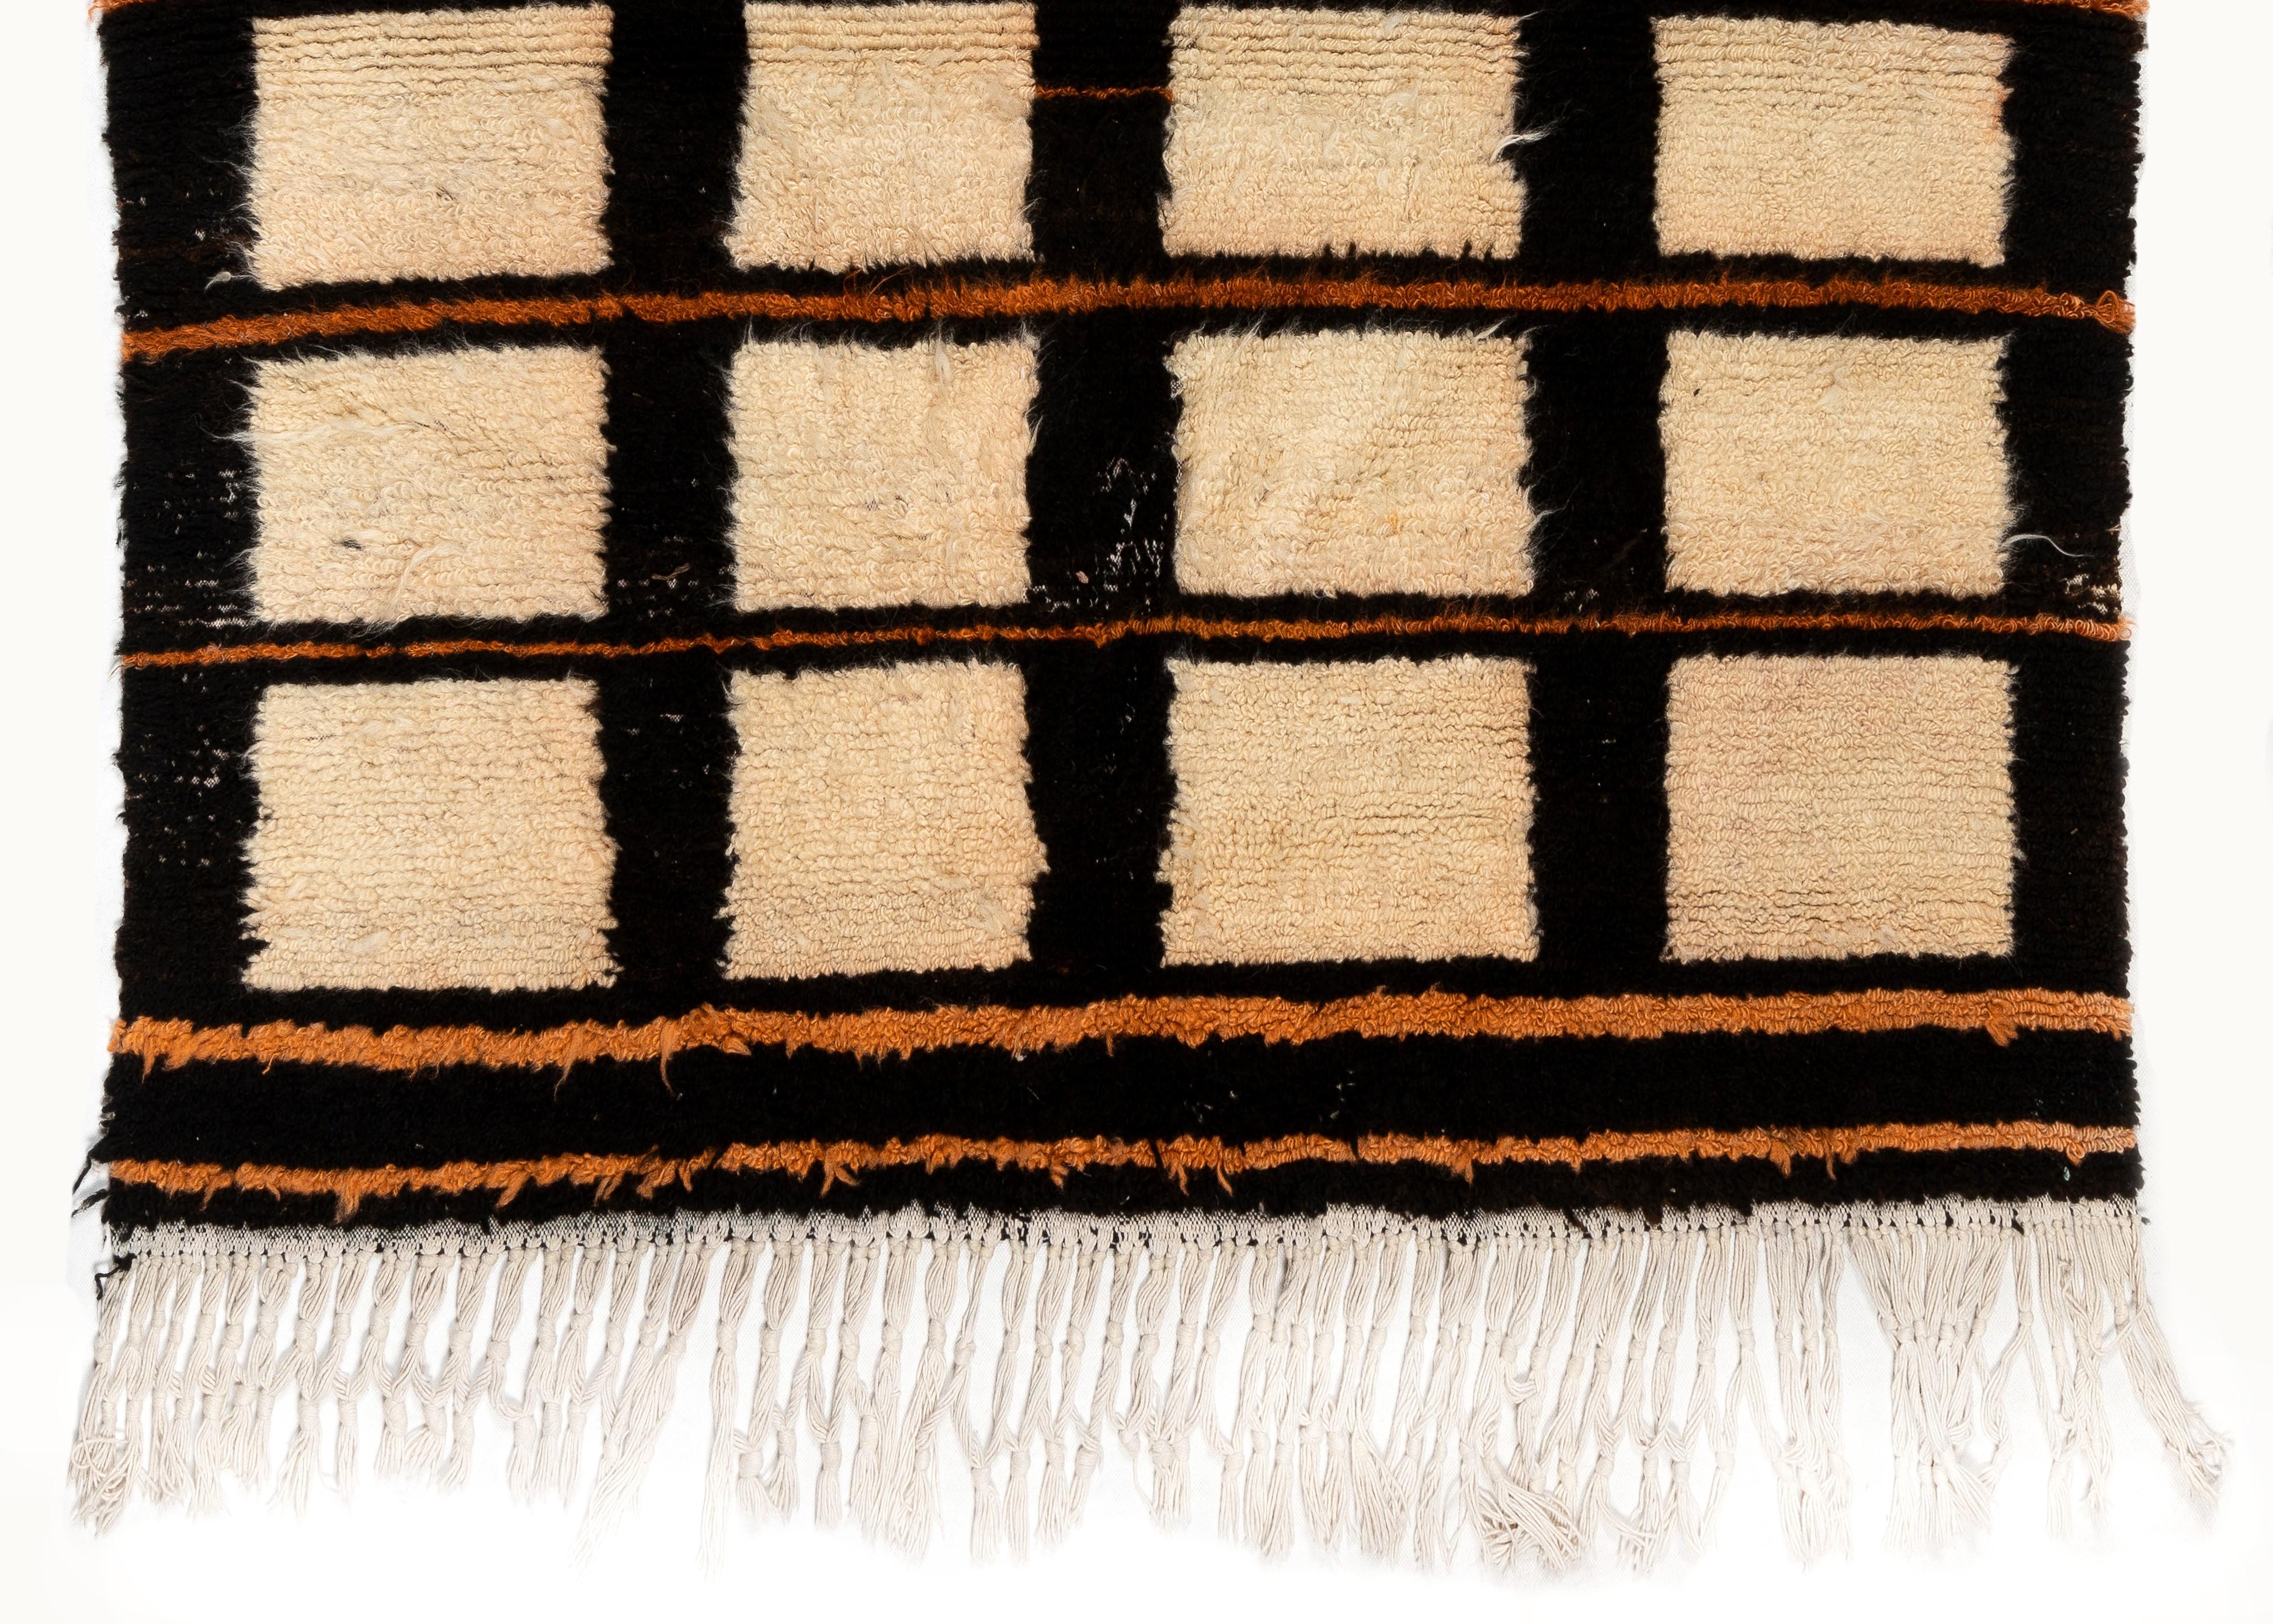 A contemporary hand knotted tulu rug, made of hand-spun sheep wool. 
The rug is made-to-order and customizable. We can make it in any size, pile hight, color combination and design of your choosing with fine wool in 4 to 6 weeks.

